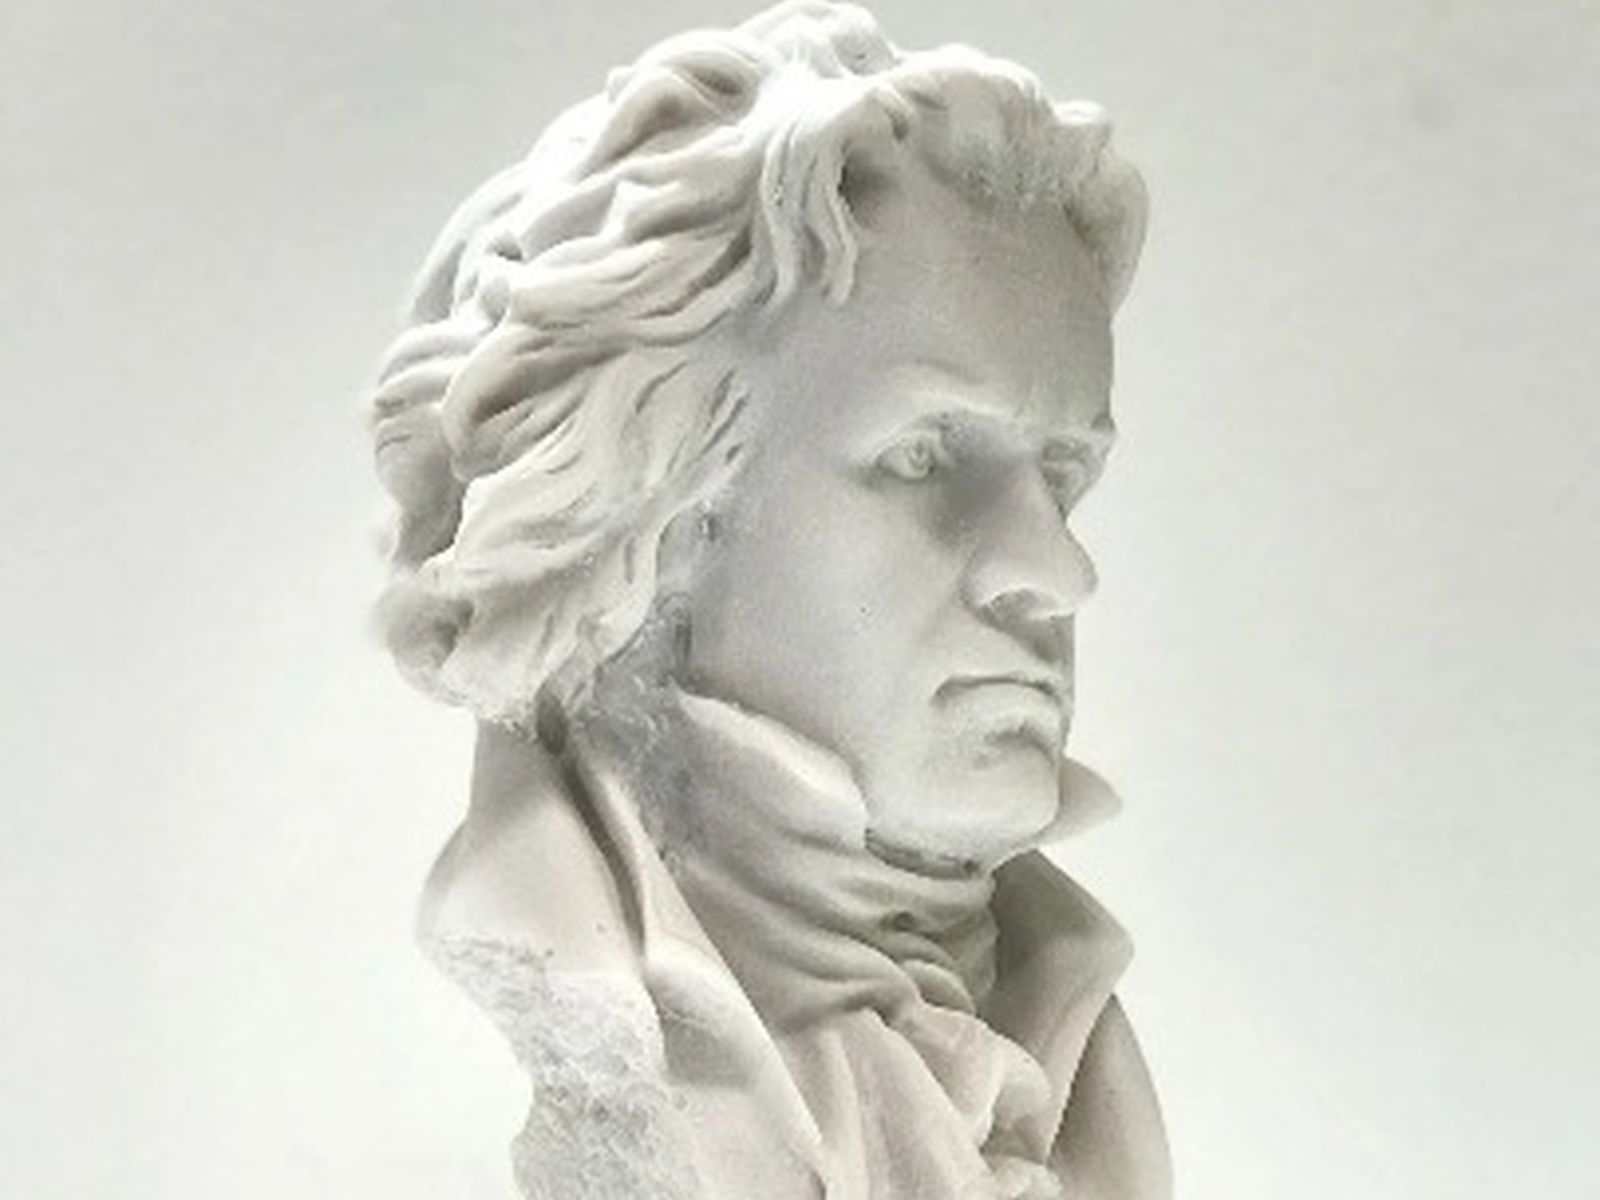 What is the Location of the Original Prometheus Beethoven Sculpture?